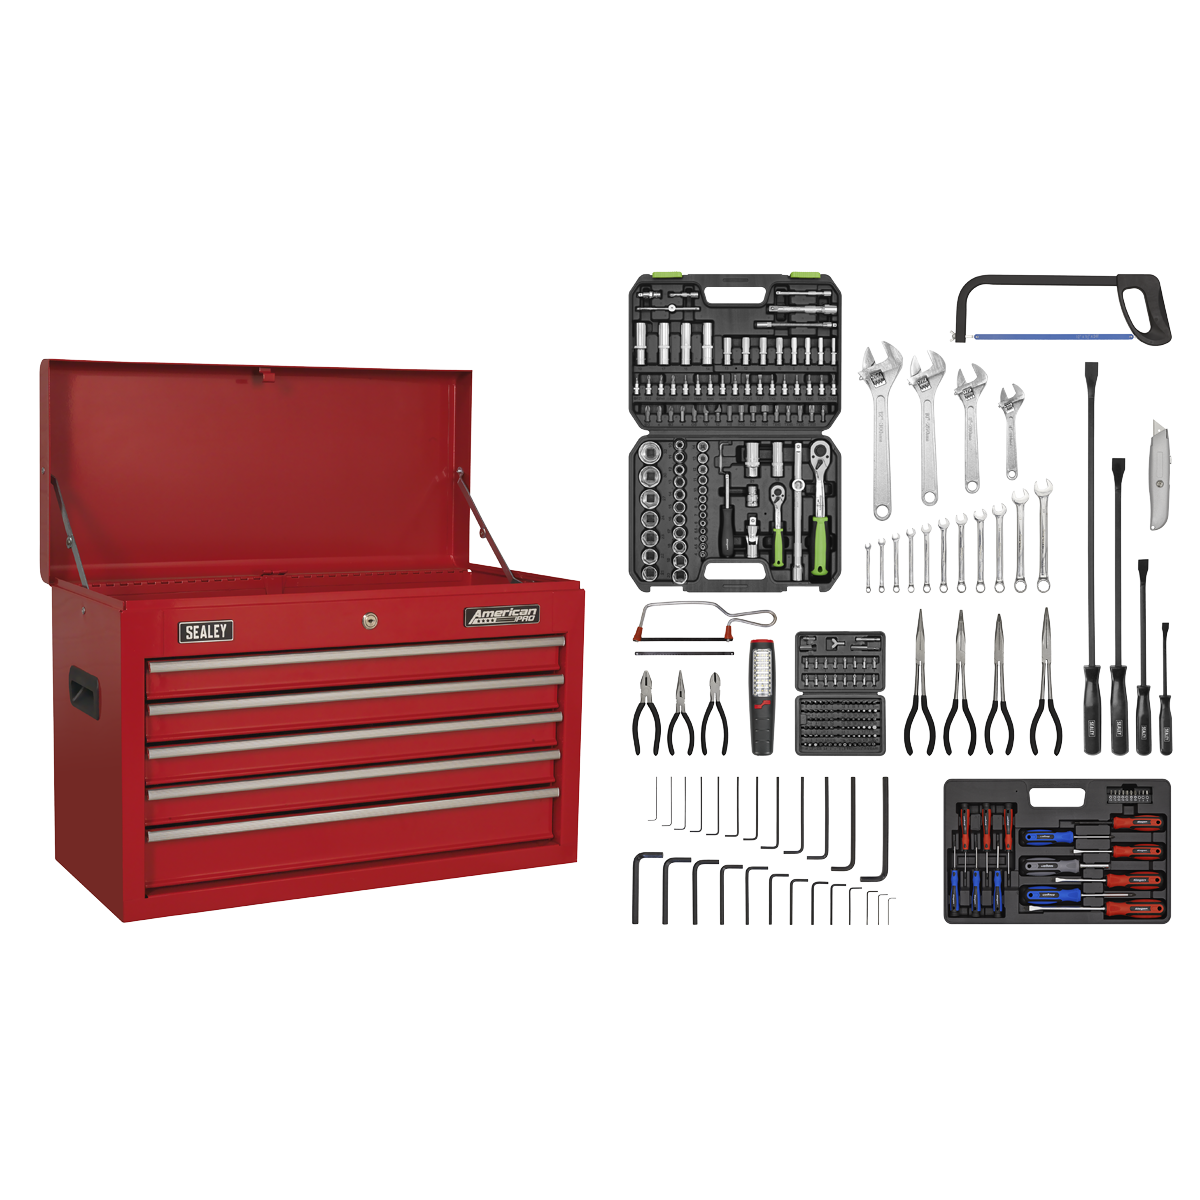 Topchest 5 Drawer with Ball-Bearing Slides - Red & 272pc Tool Kit - AP225COMBO - Farming Parts